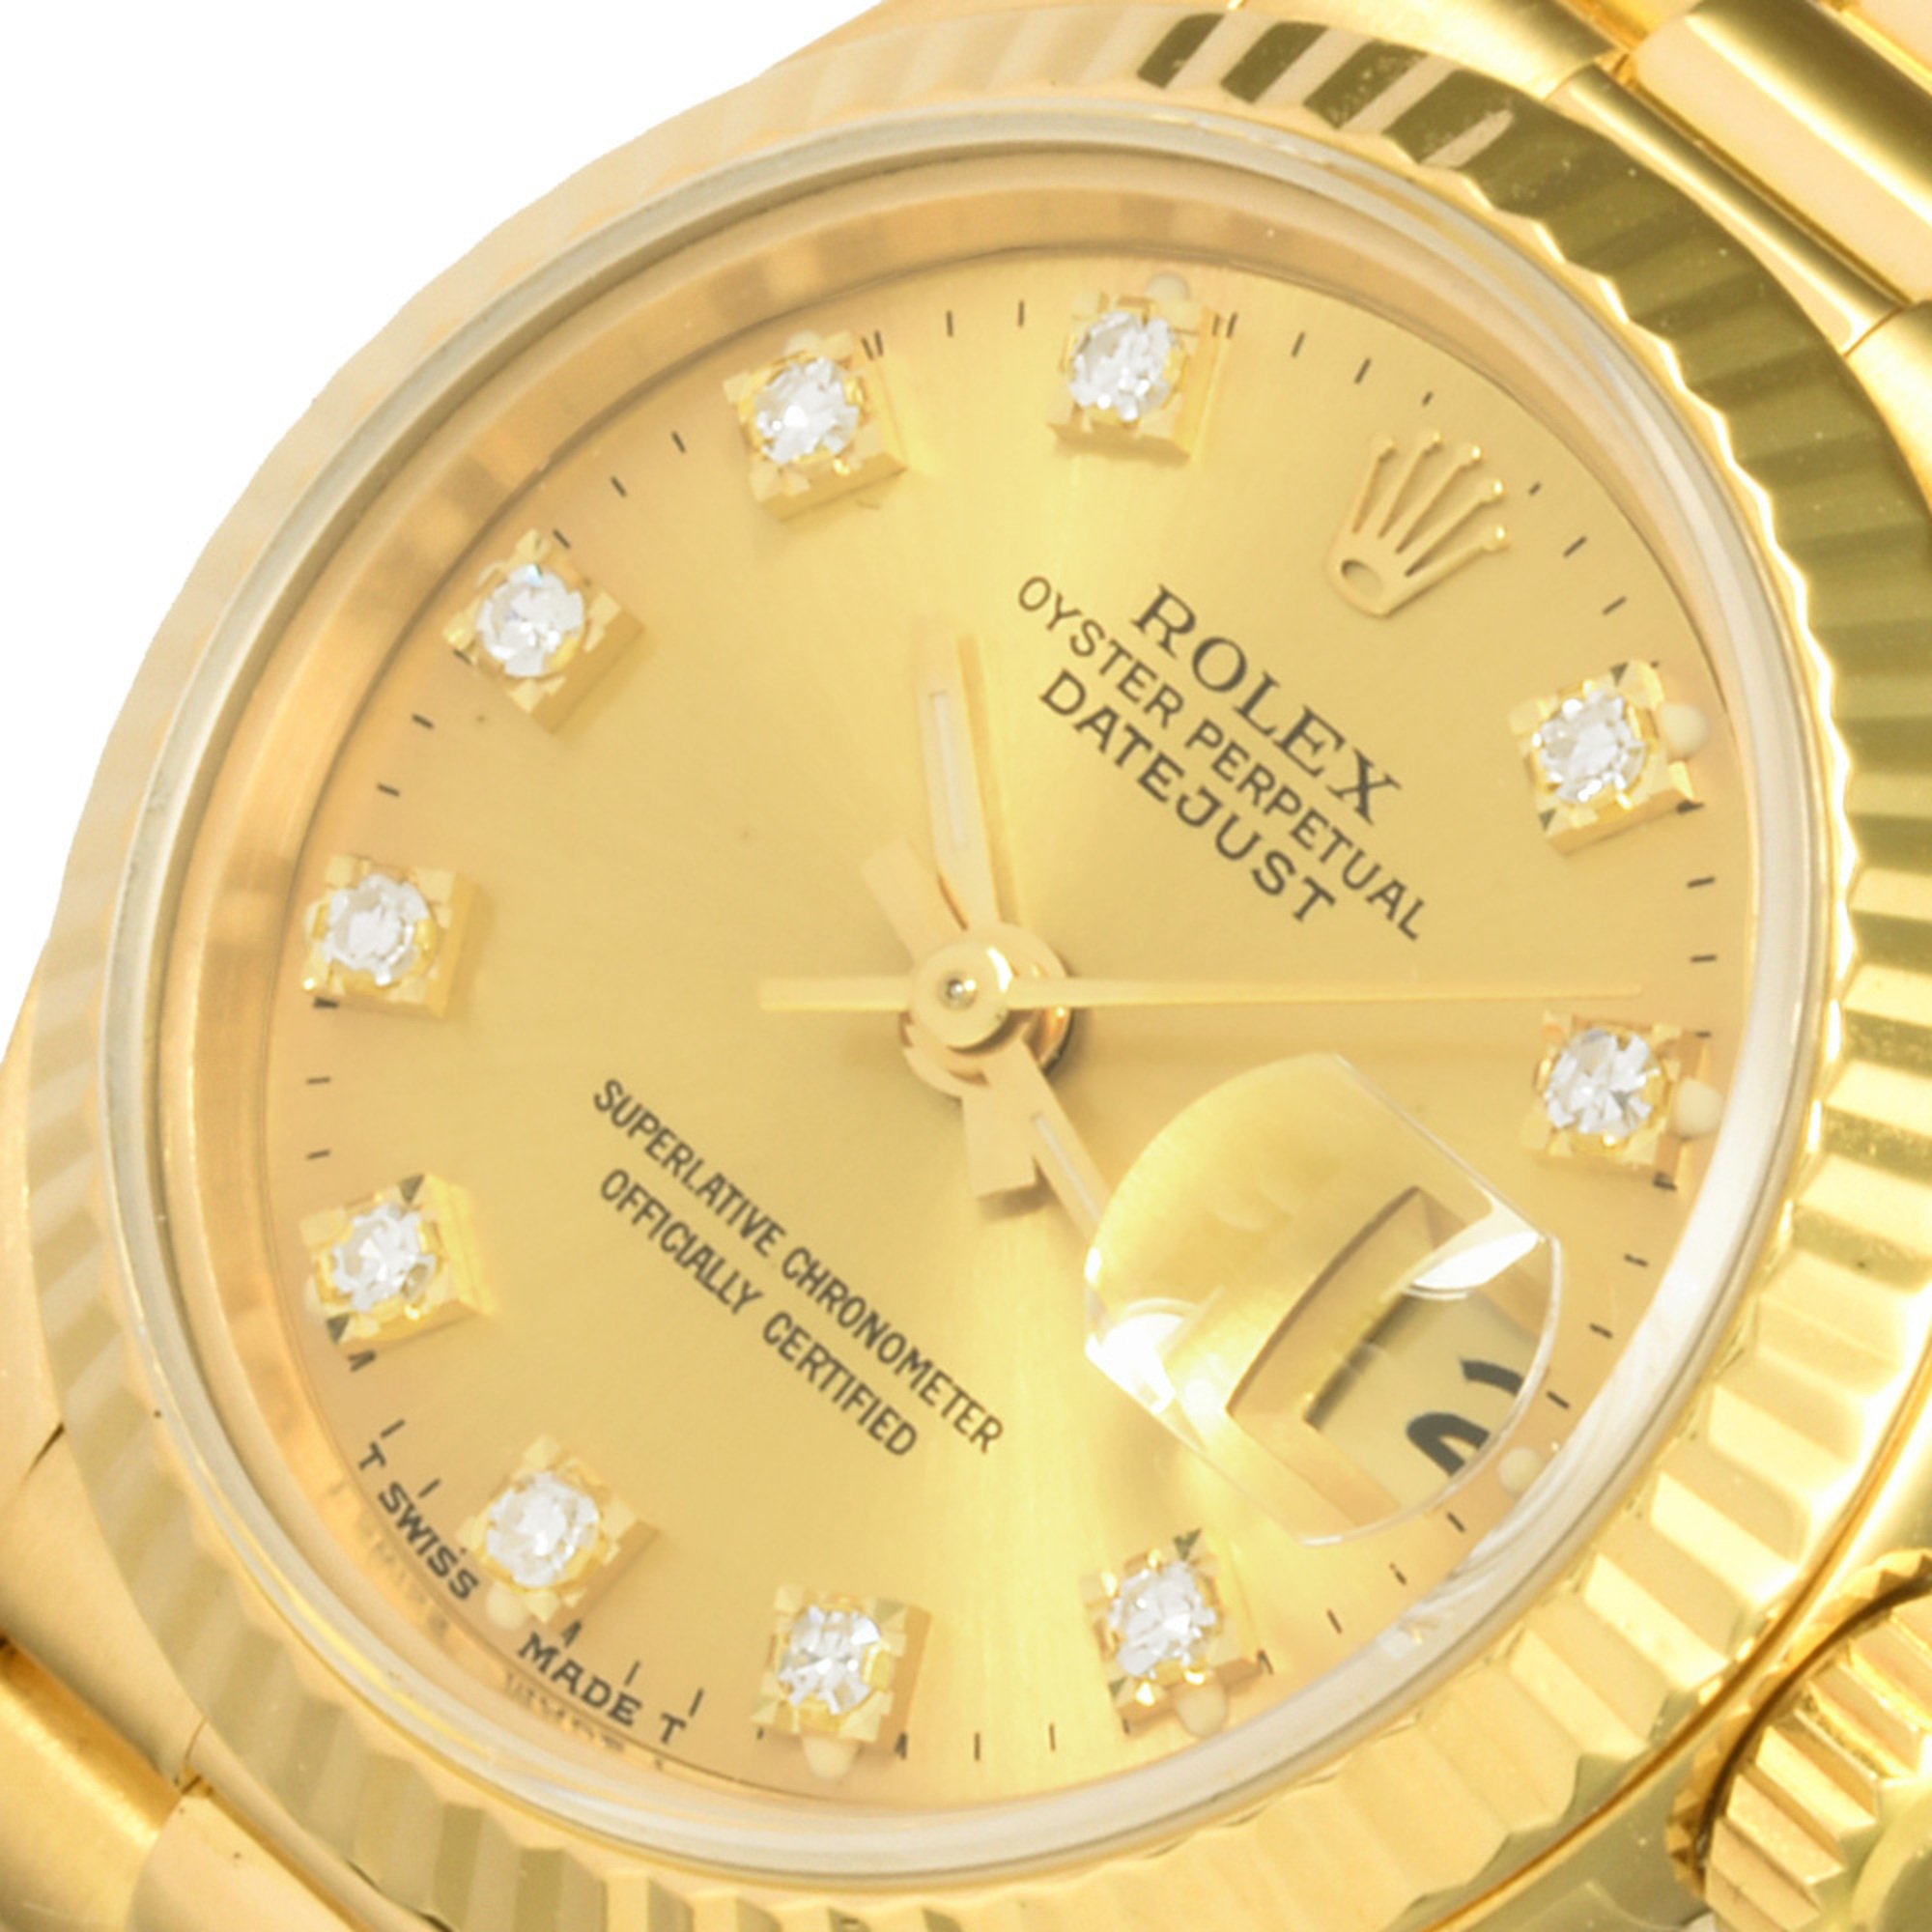 Rolex ROLEX 69178G Datejust 10P Diamond R Series (manufactured in 1987) Automatic Wristwatch Champagne Dial K18 Solid Gold Ladies